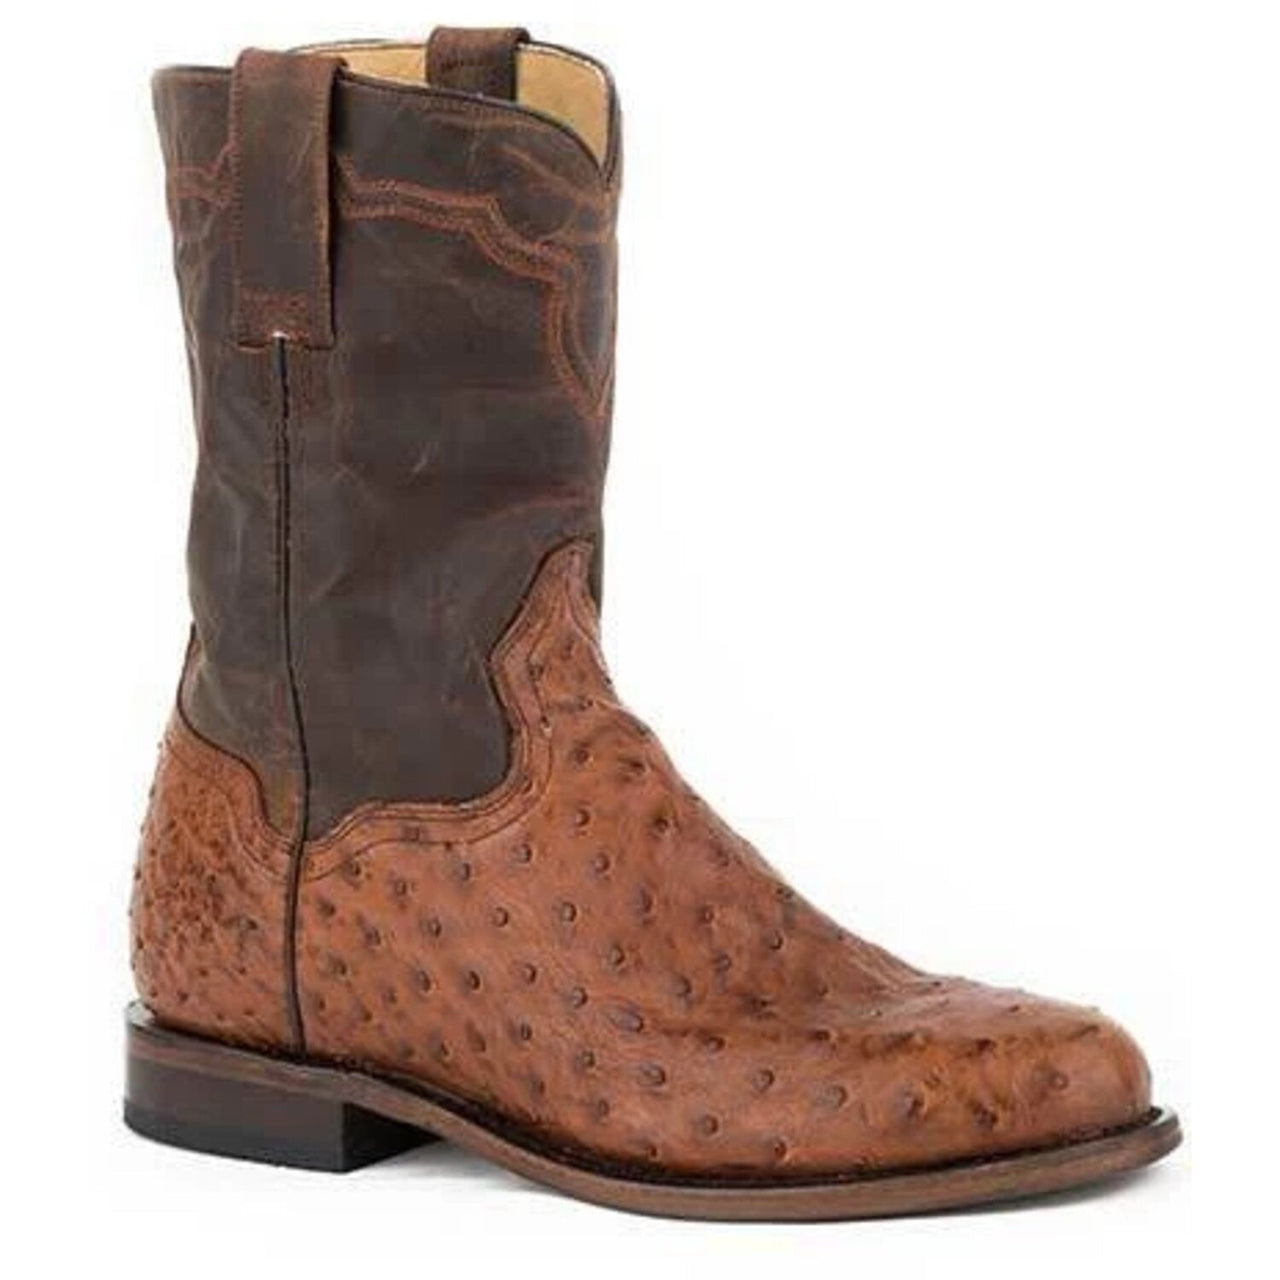 Men's Stetson Puncher Exotic Ostrich Boots Handcrafted Cognac - yeehawcowboy